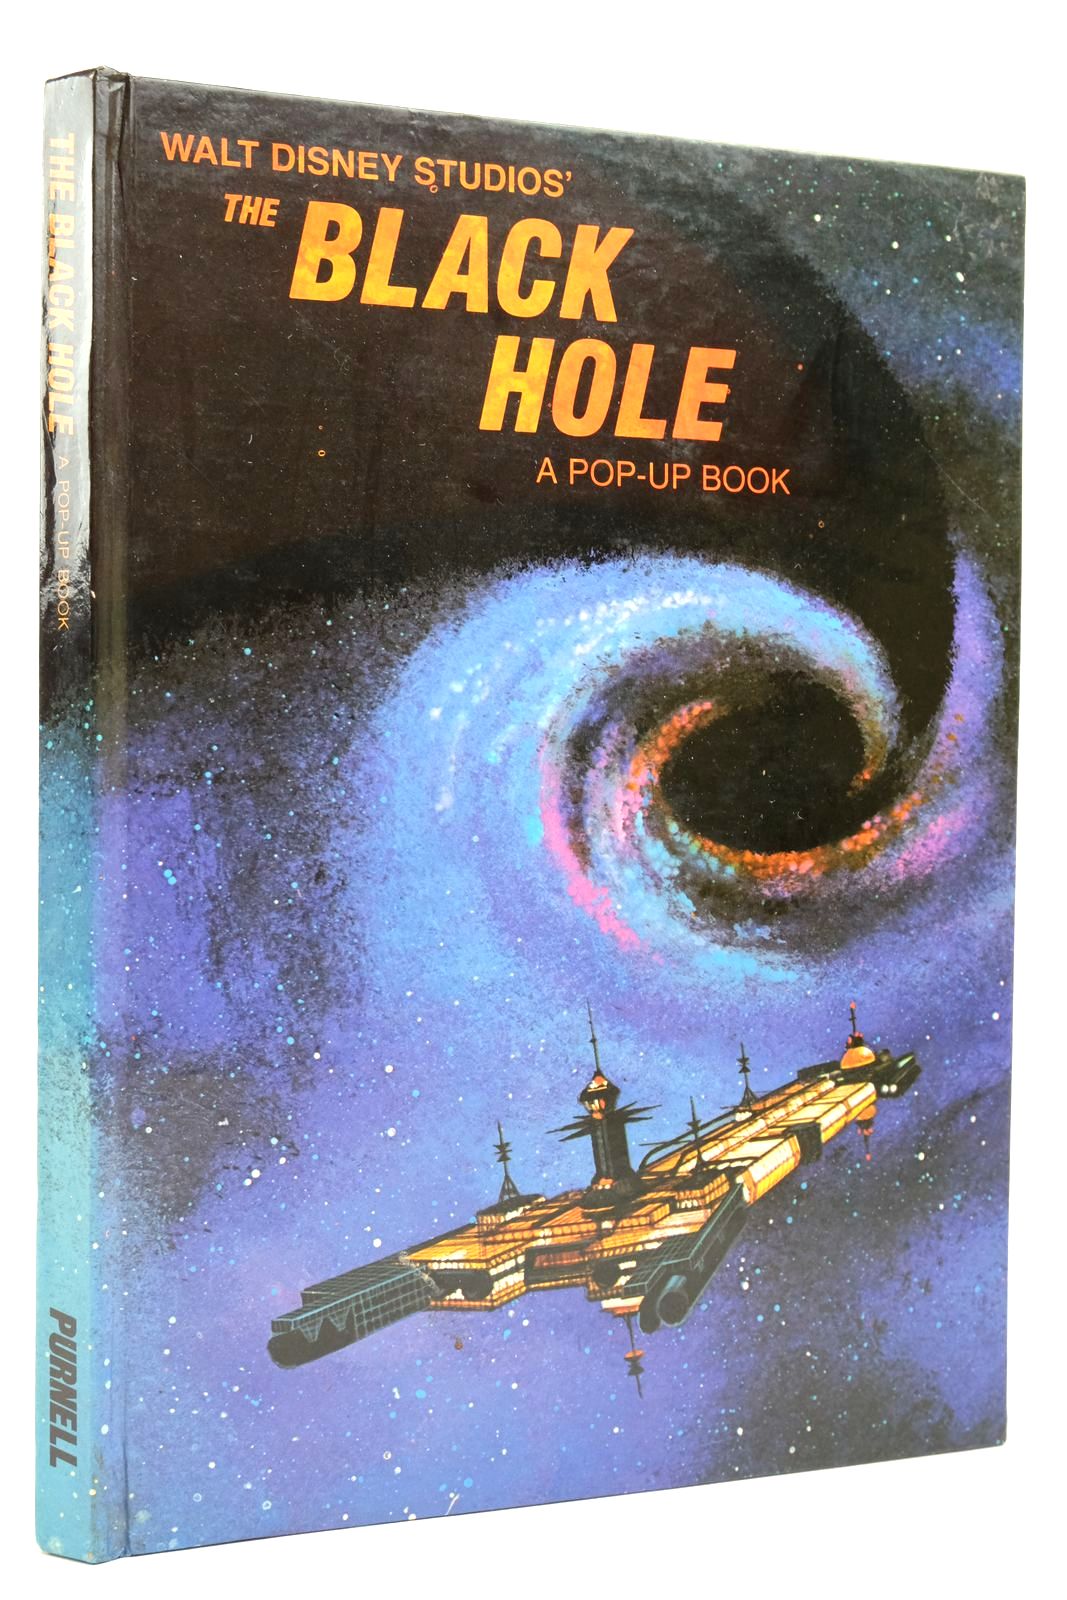 Photo of THE BLACK HOLE A POP-UP BOOK written by Disney, Walt published by Purnell (STOCK CODE: 2140896)  for sale by Stella & Rose's Books